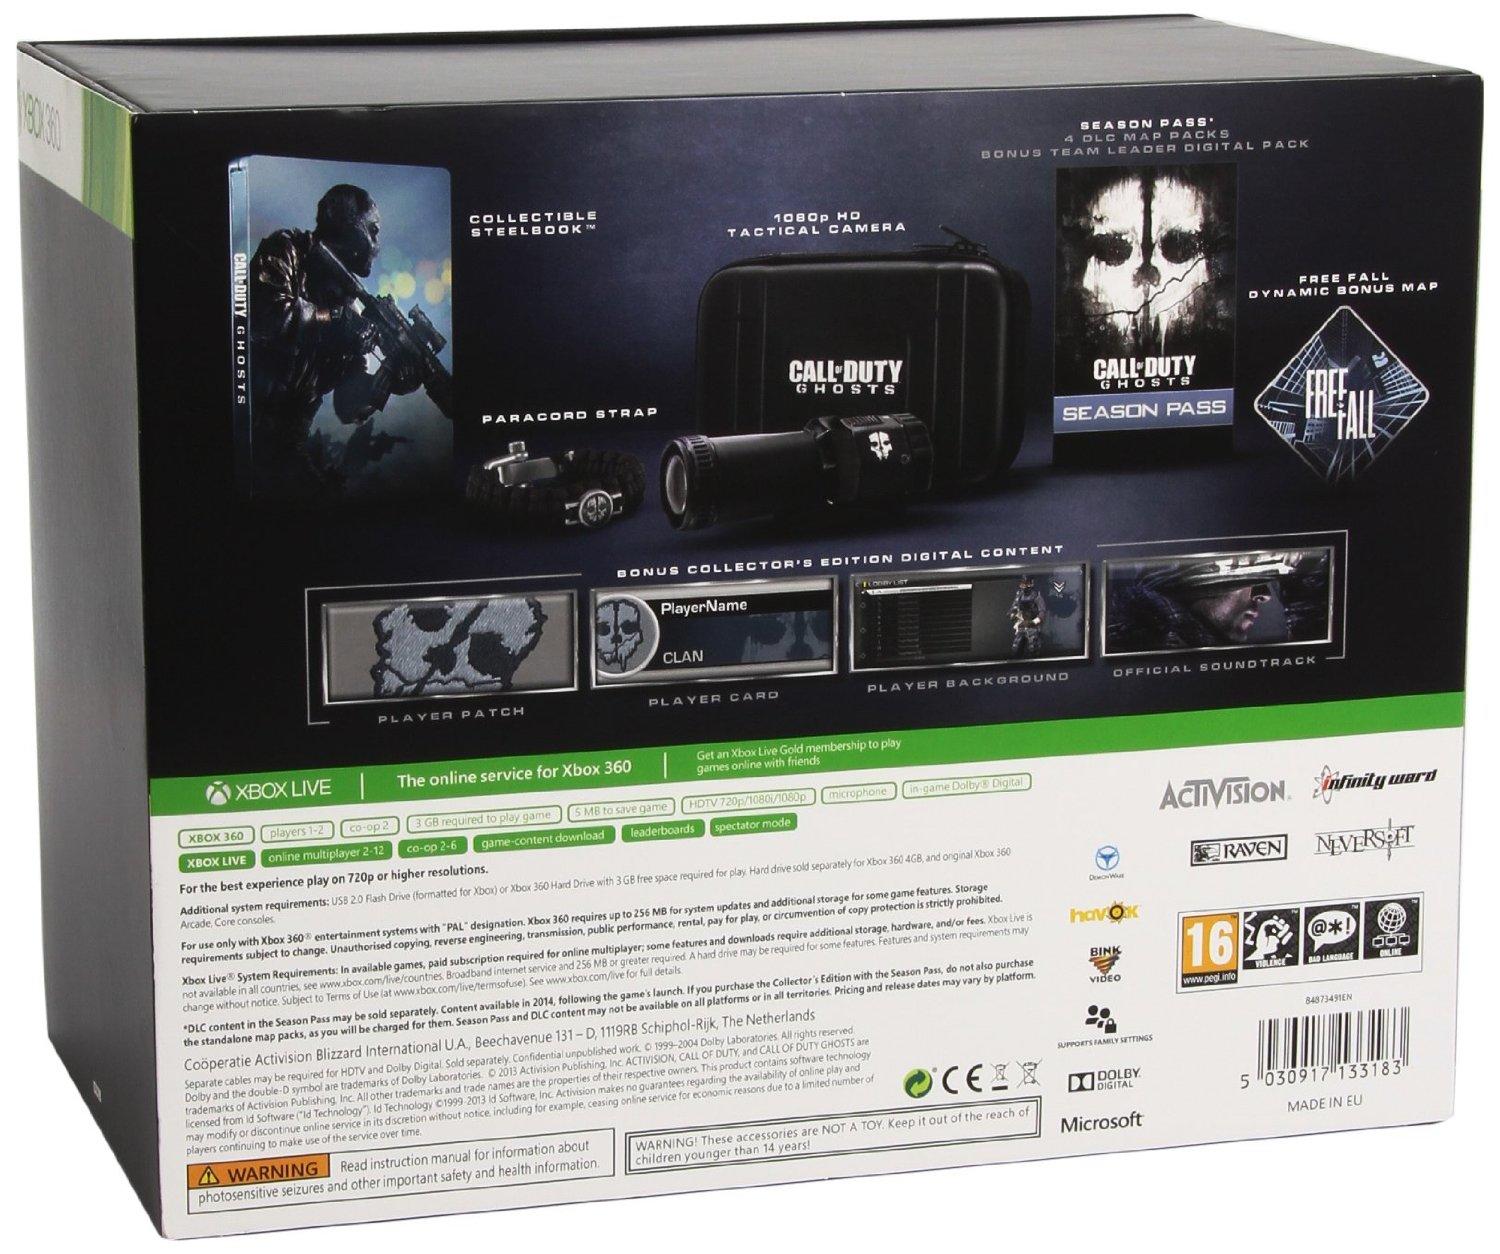 Call of Duty Ghosts Prestige Edition Tactical Camera 1080p HD & Accessories